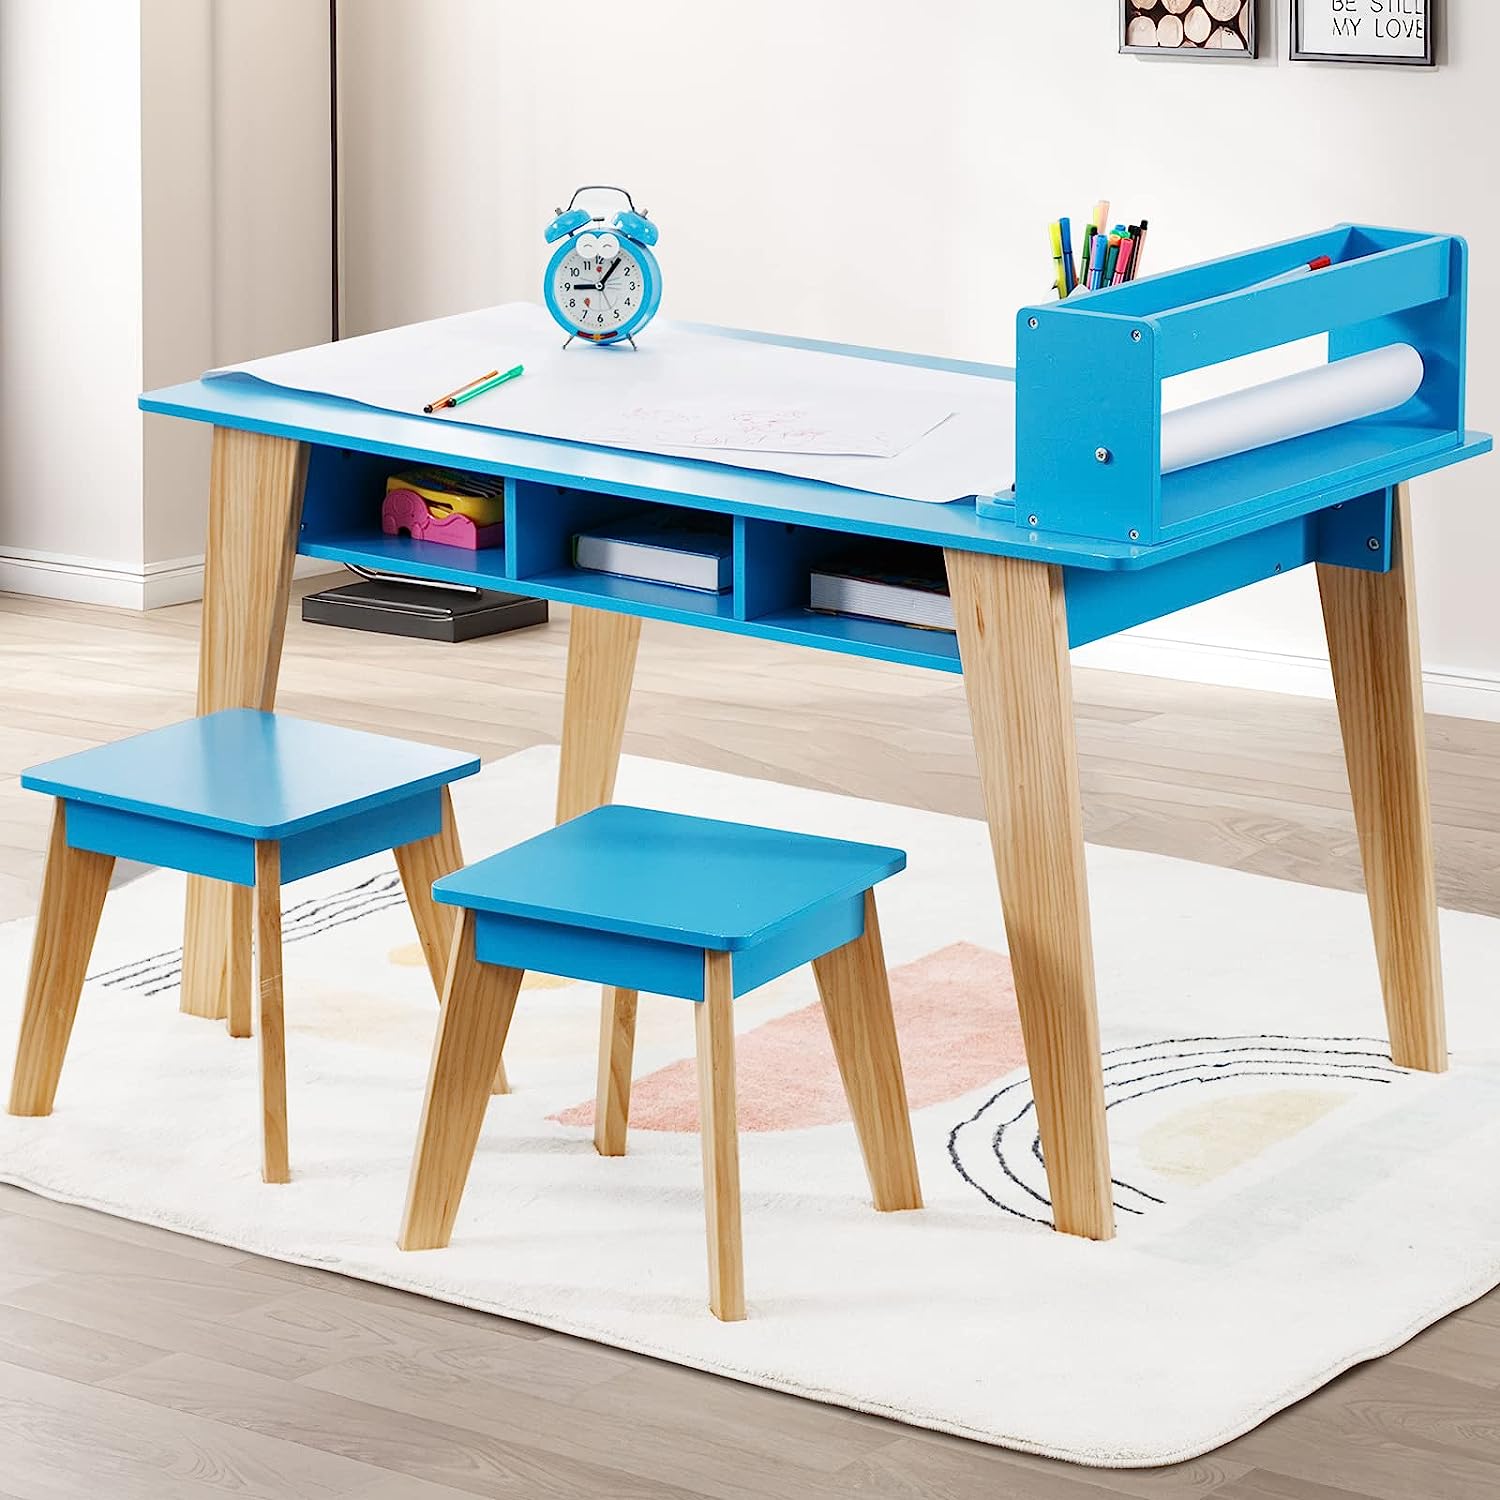 Mjkone Kids Art Table and 2 Chairs,Wooden Kid Craft Desk,Drawing and  Painting Table Sets for Chirldren,Preschool Toddler Learning Furniture with  Paper